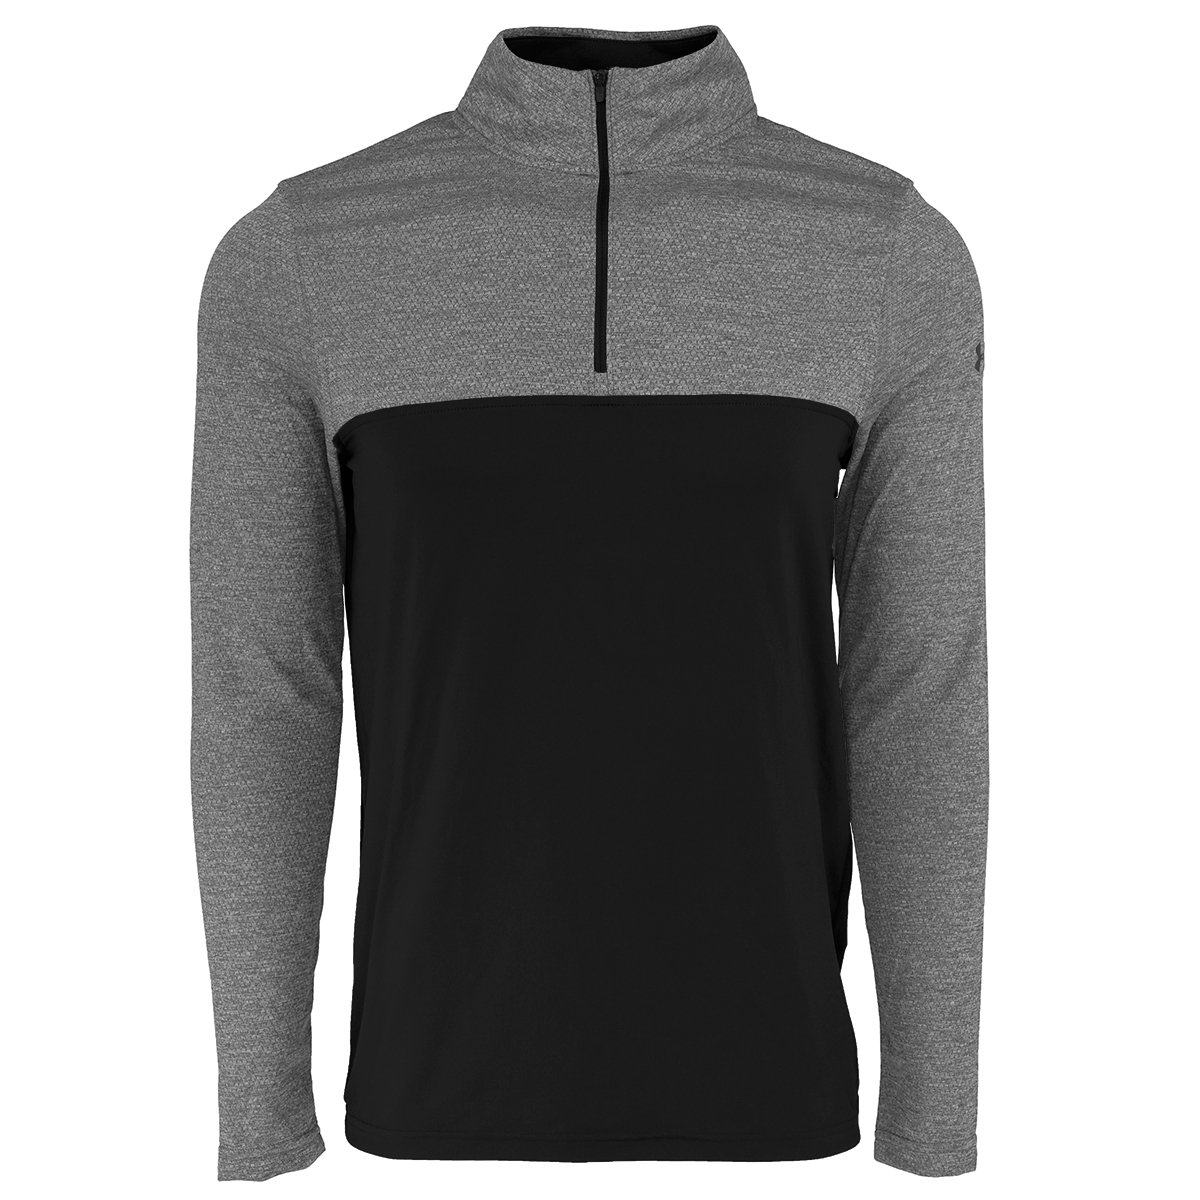 Mens Under Armour Scratch Blocked Golf Pullovers